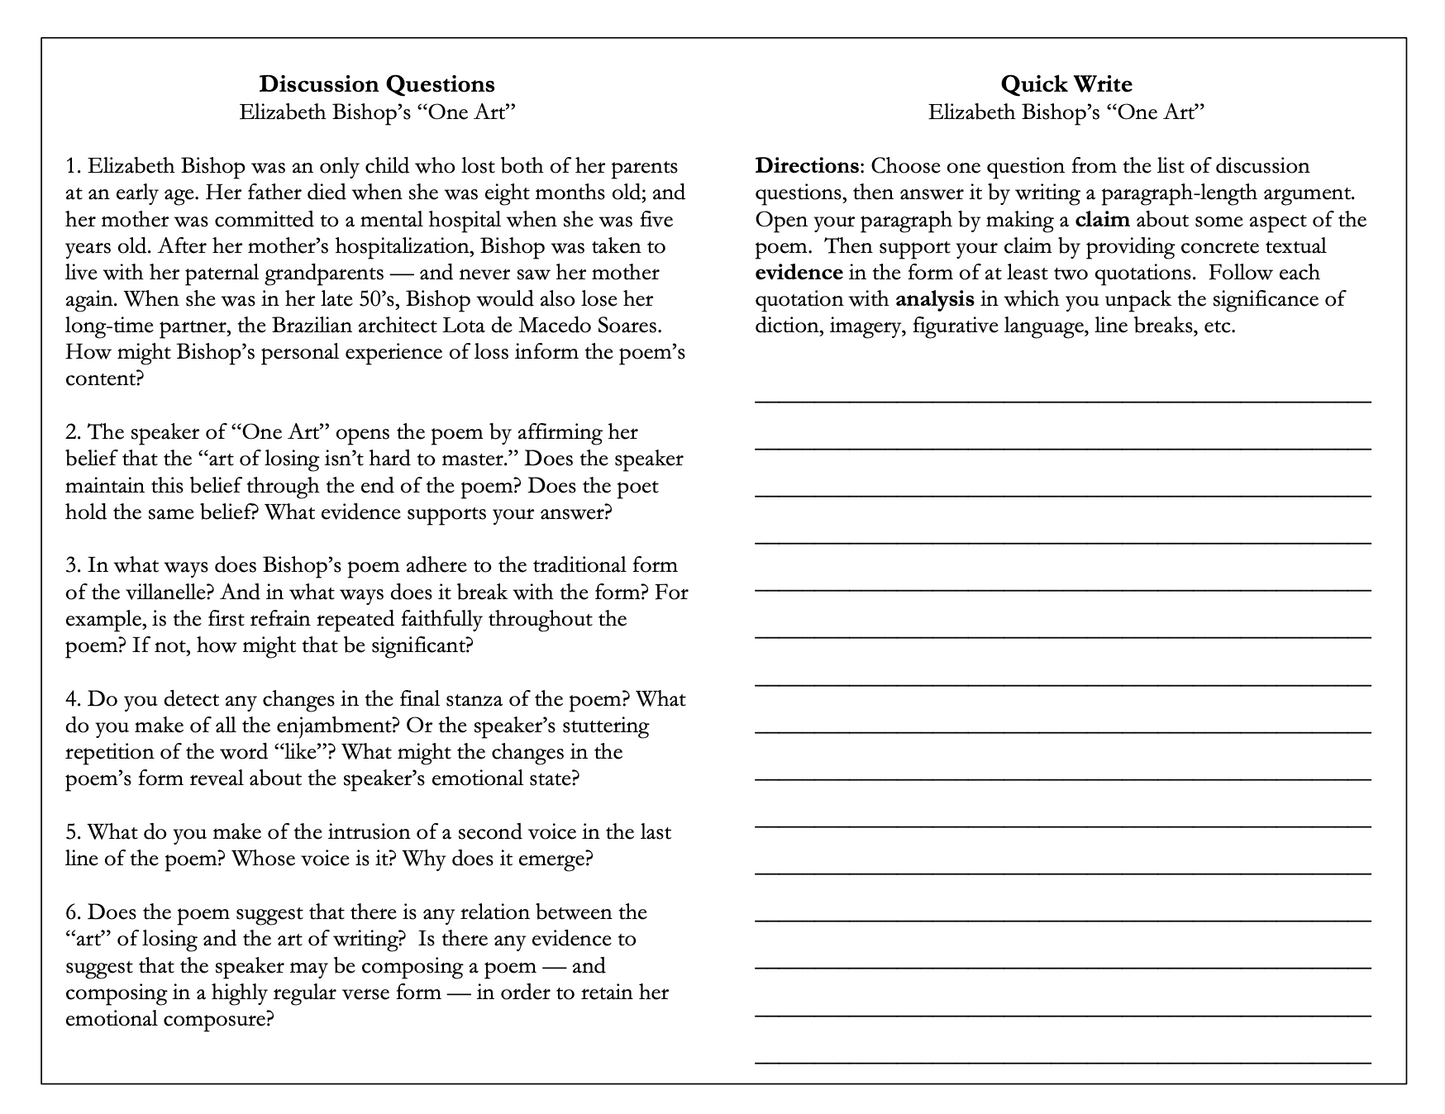 American Poetry Unit | Discussion Questions & Writing Assignments on 5 American Poets